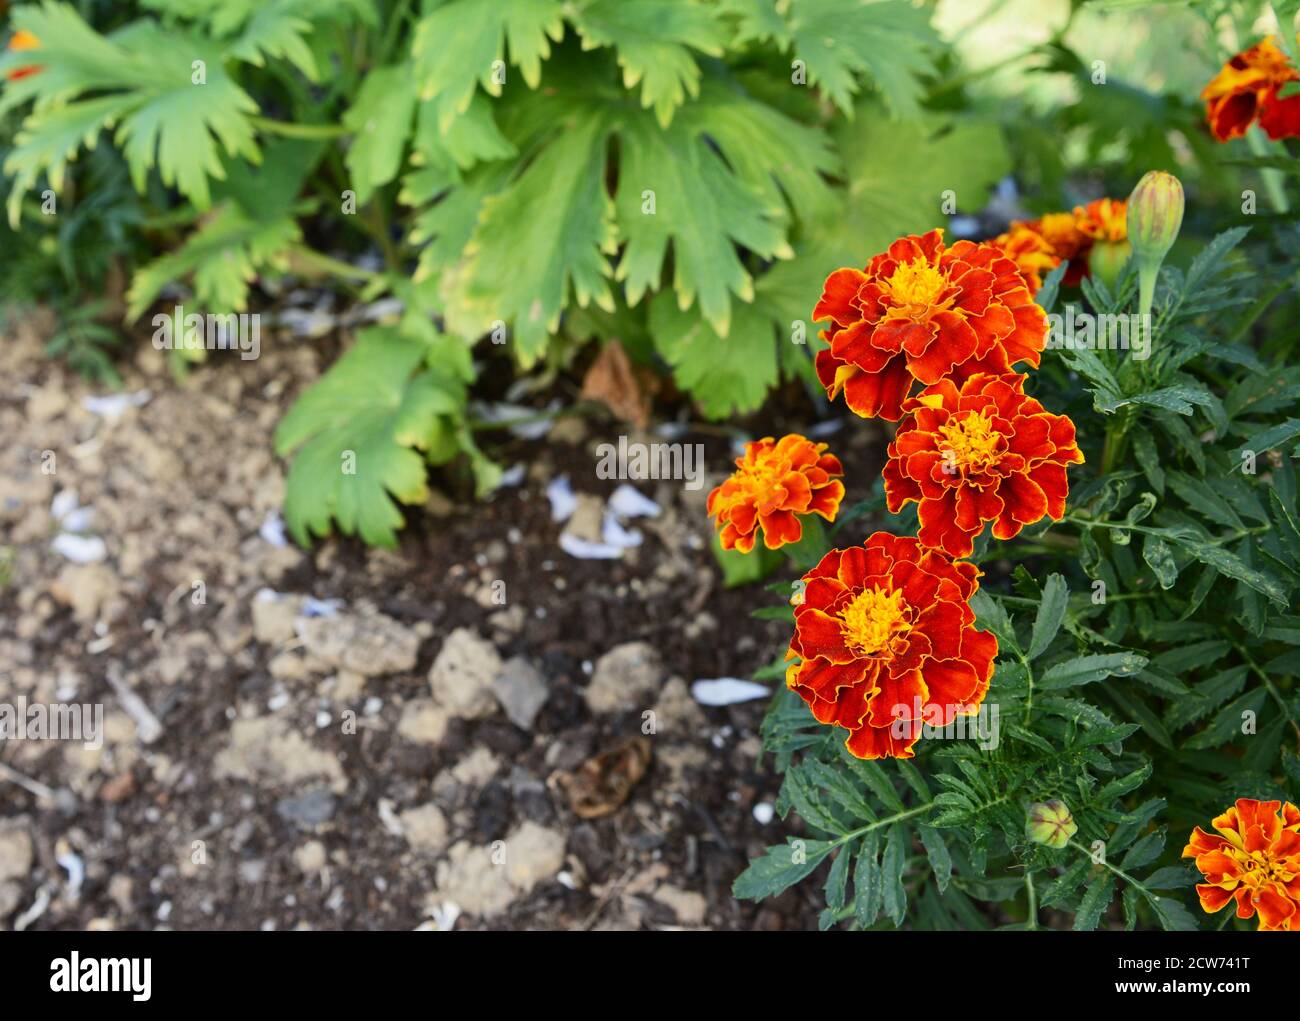 Red and yellow French marigolds with dark green foliage, growing in a flower bed with copy space Stock Photo